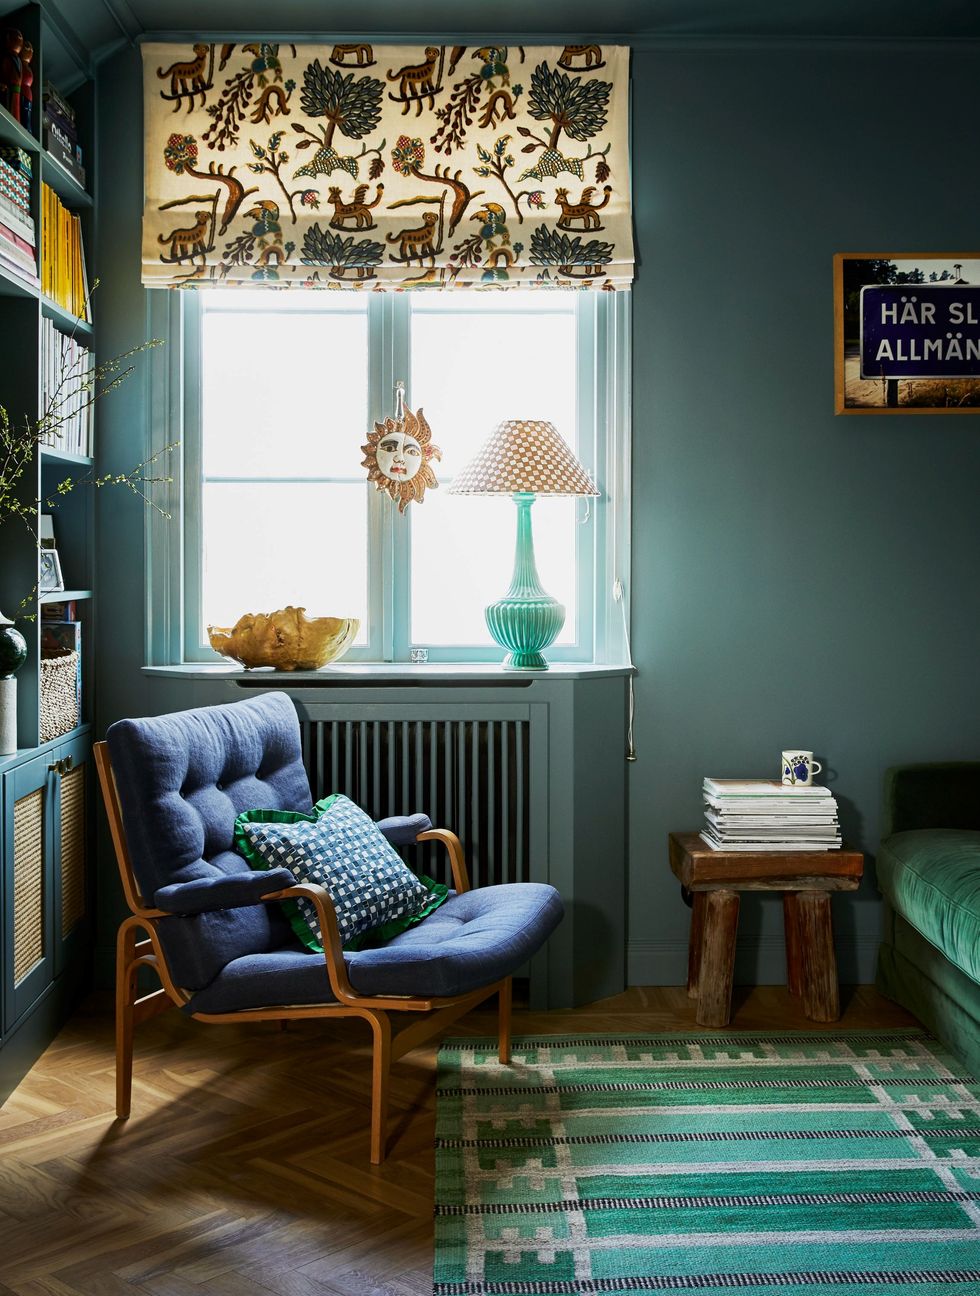 Home tour: Inside Cathy Nordström’s colourful family home in Stockholm